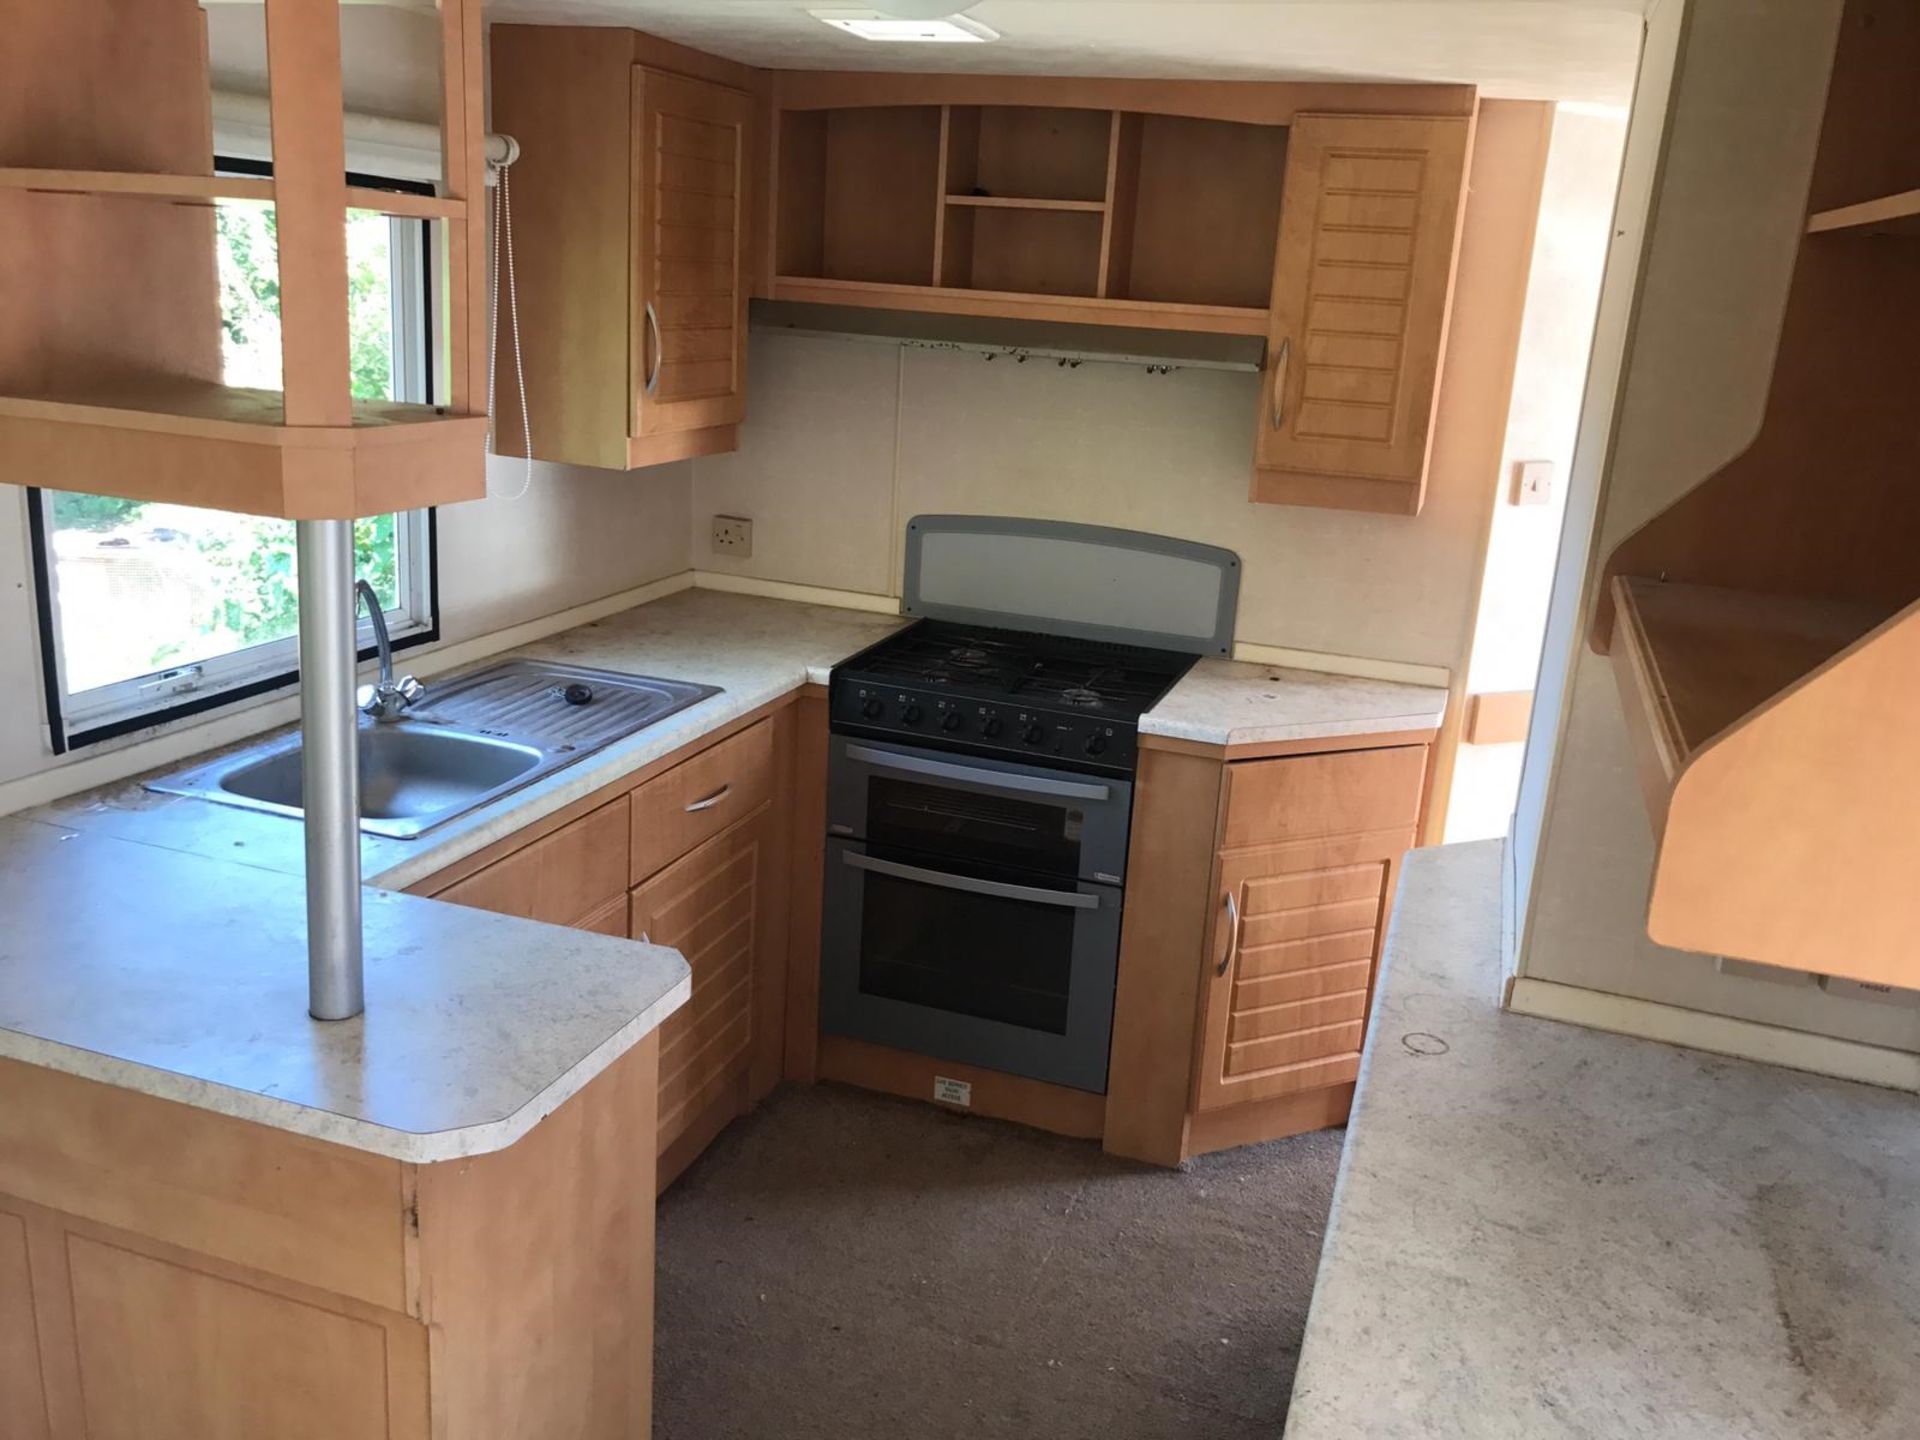 STATIC CARAVAN / MOBILE HOME - TO BE REMOVED WITHIN 7 DAYS, NO RESERVE! *NO VAT* - Image 12 of 18